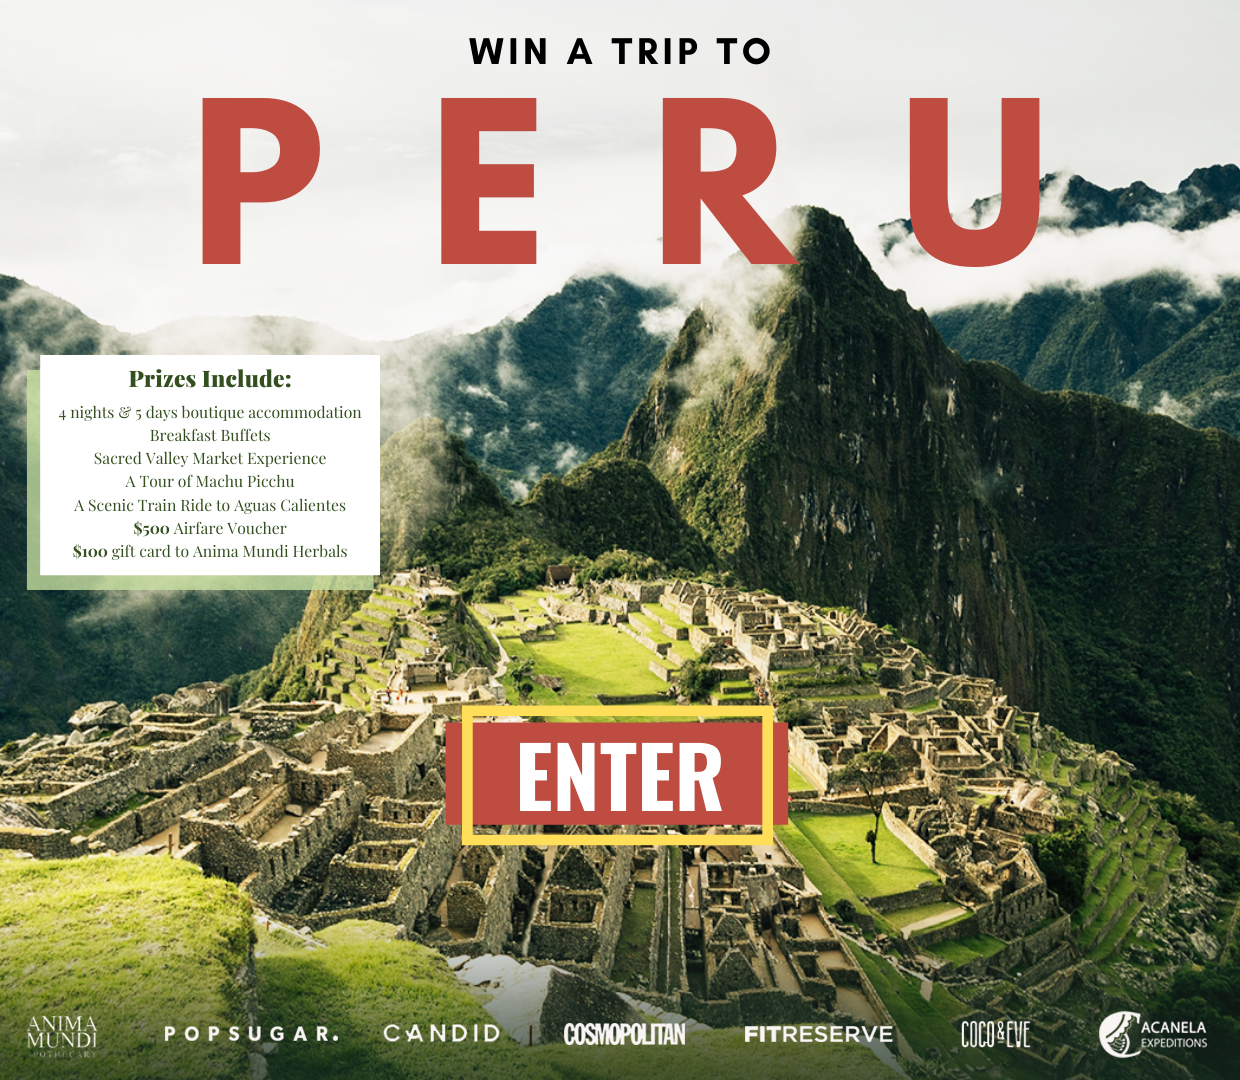 You could win the following for an amazing trip in Peru: 4-night, 5-day boutique accommodation, breakfast buffets, Sacred Valley Market Experience, a tour of Machu Picchu, a scenic train ride to Aguas Calientes, a $500 airfare voucher, and a $100 gift card to Anima Mundi Herbals.